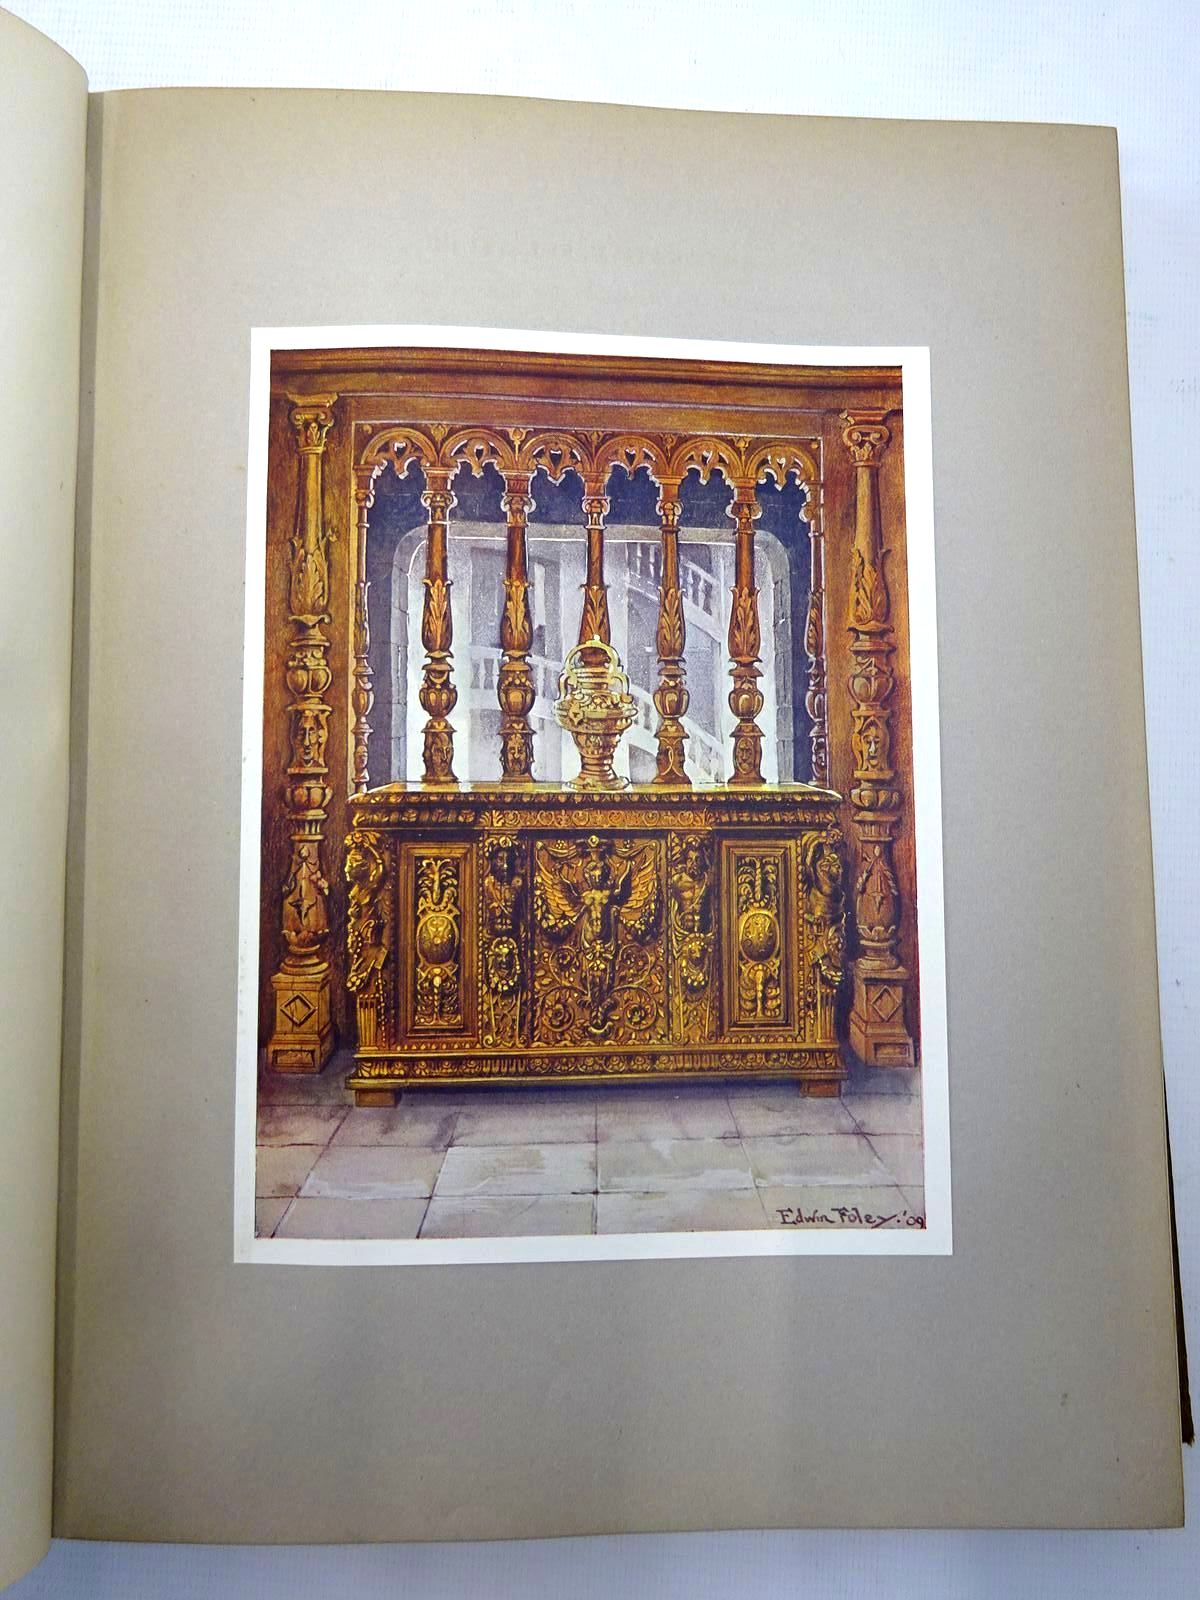 Photo of THE BOOK OF DECORATIVE FURNITURE ITS FORM, COLOUR, & HISTORY (2 VOLUMES) written by Foley, Edwin illustrated by Foley, Edwin
et al., published by T.C. & E.C. Jack Ltd. (STOCK CODE: 2126391)  for sale by Stella & Rose's Books